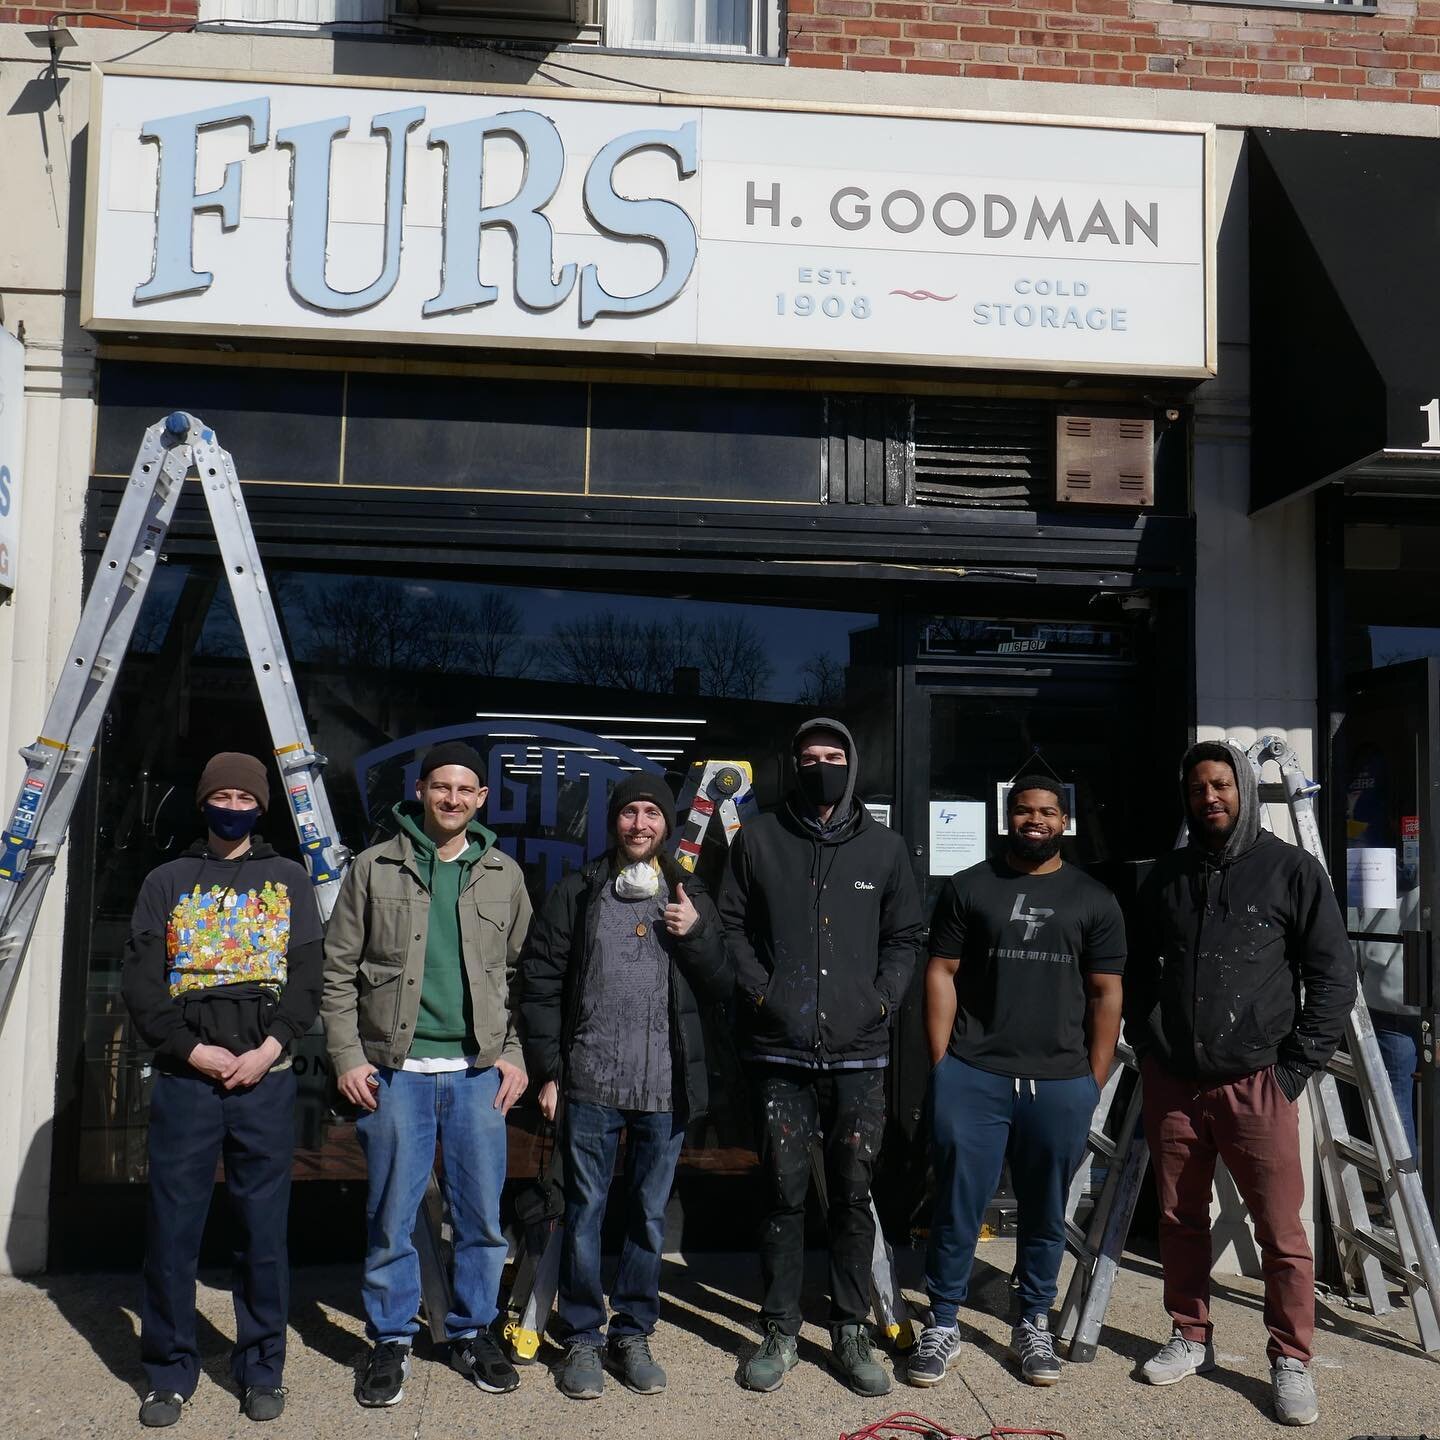 One cold and breezy afternoon in February, our intrepid team drove out to Forest Hills to save this beauty of a sign from an uncertain future. Our fully-insured crew de-installs signs at no cost, giving building/business owners a convenient and risk-